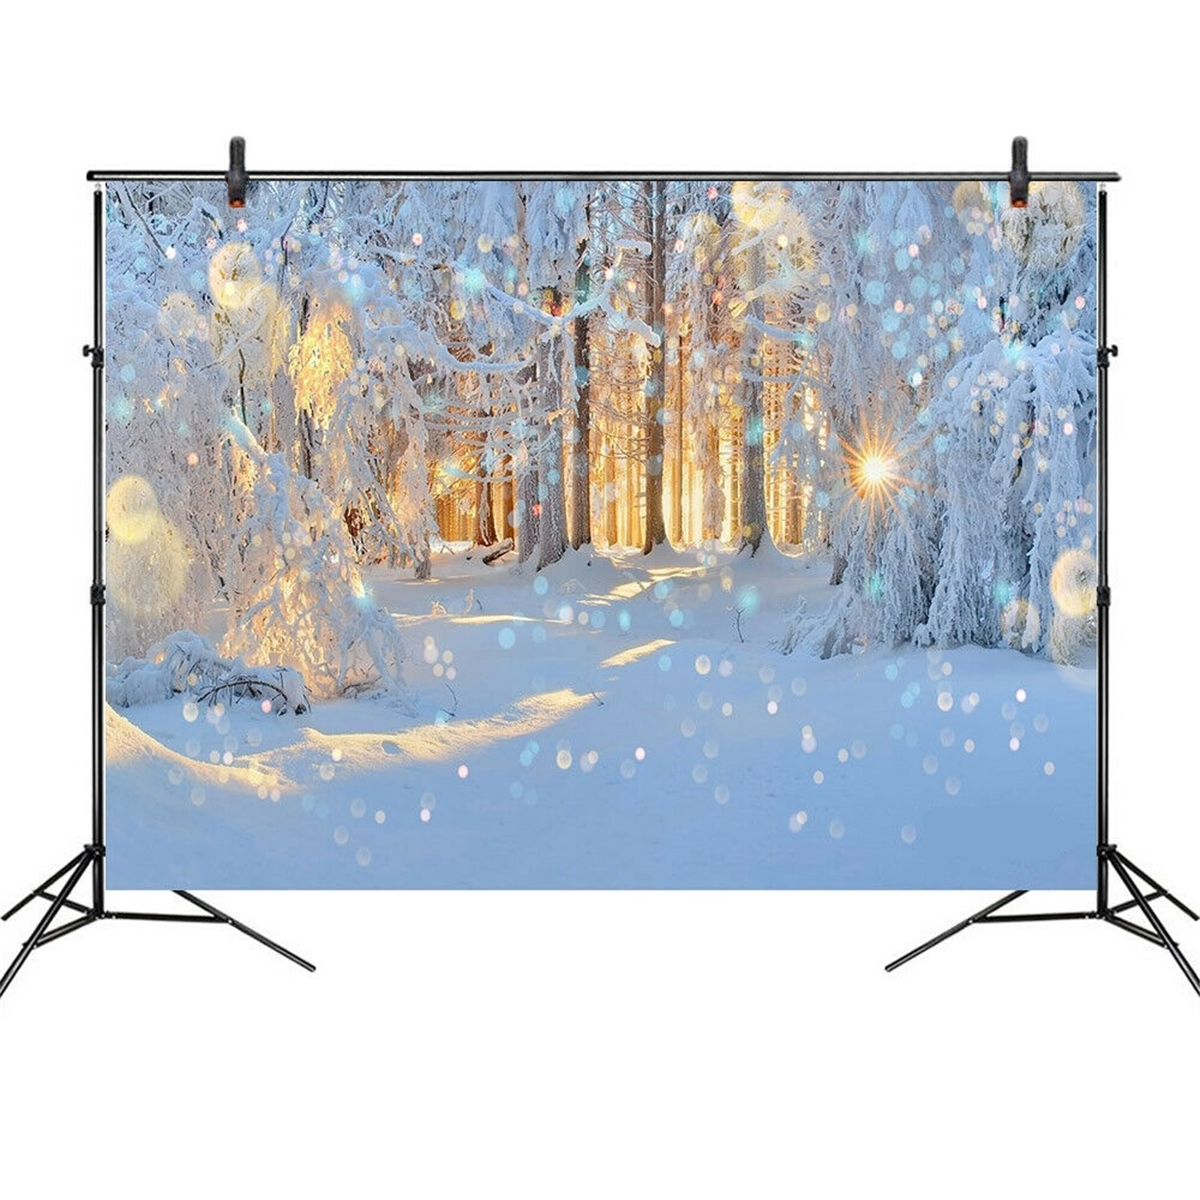 5x3FT-7x5FT-8x6FT-Winter-Snow-Light-Forest-Photography-Backdrop-Background-Studio-Prop-1609473-1